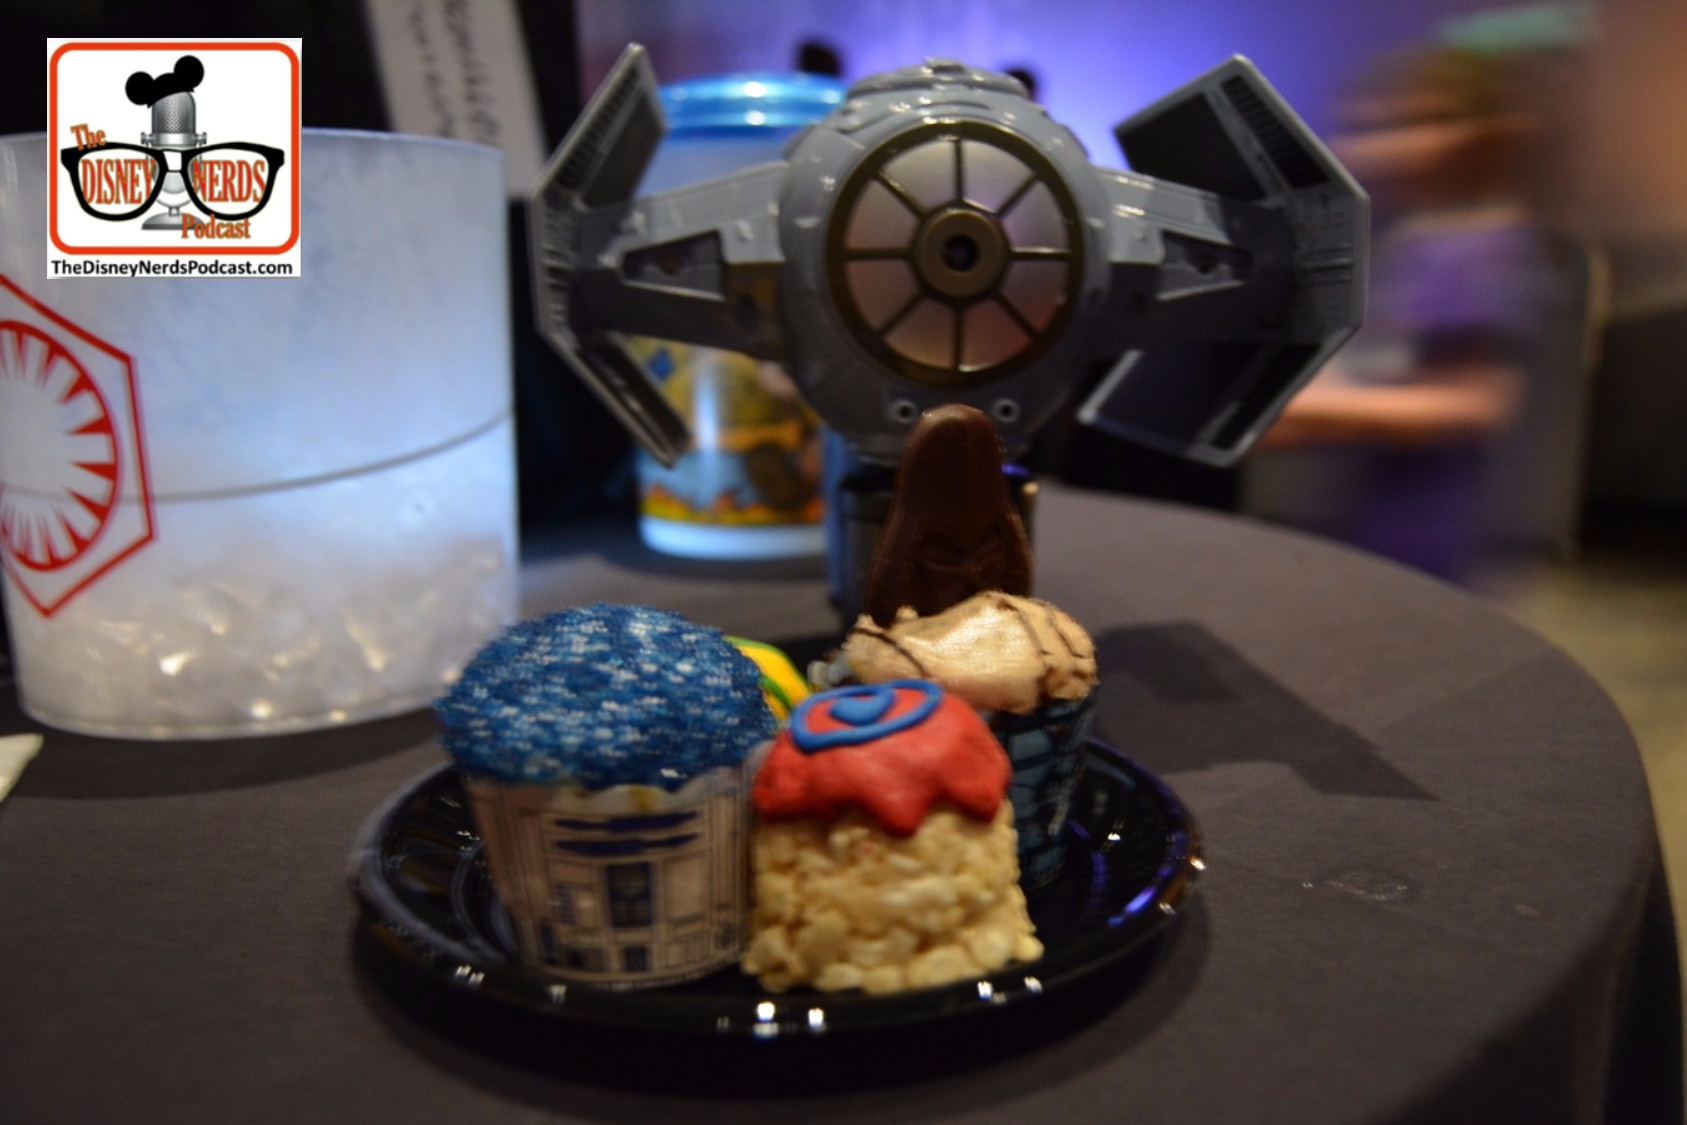 Hollywood Studios March 2017 - Launch Bay Dessert Party! With Bubble Maker (Not included)